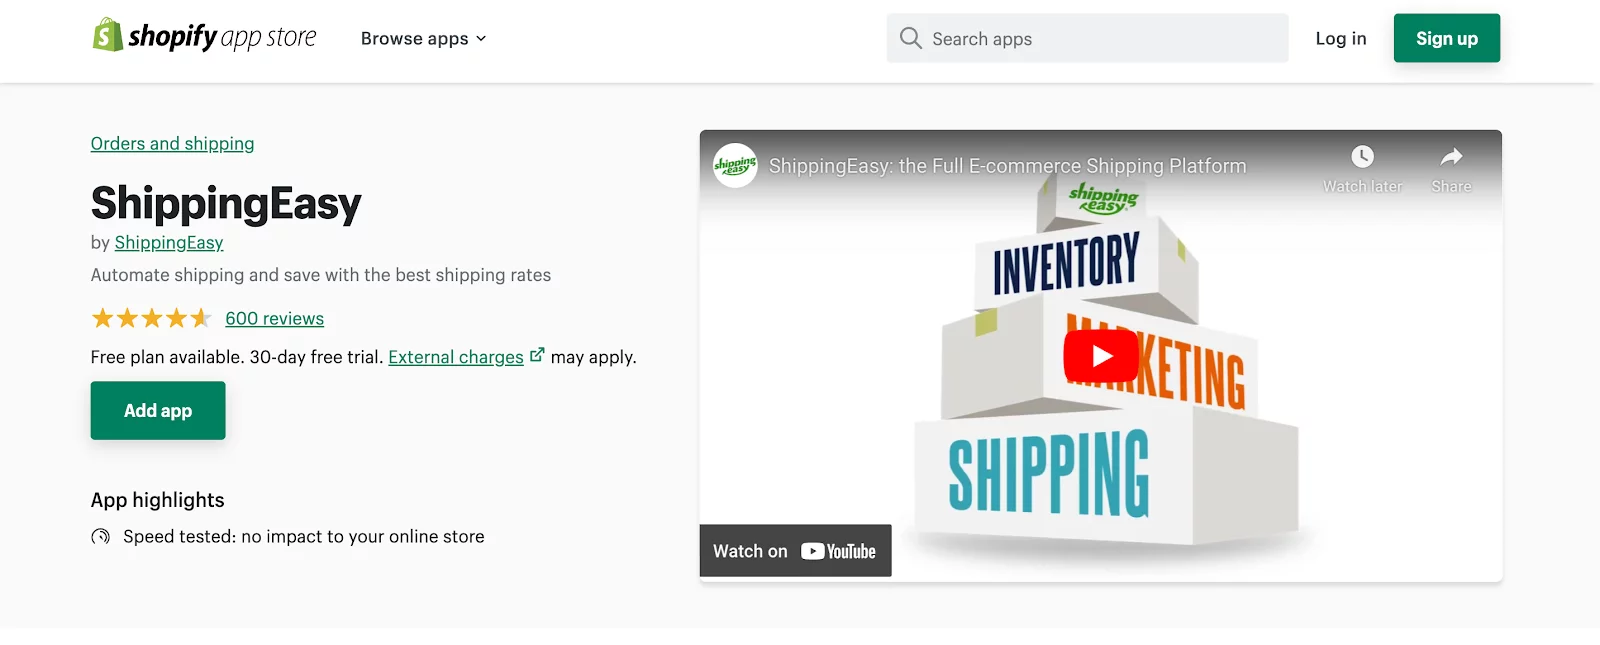 Shipping Apps for Shopify: ShippingEasy